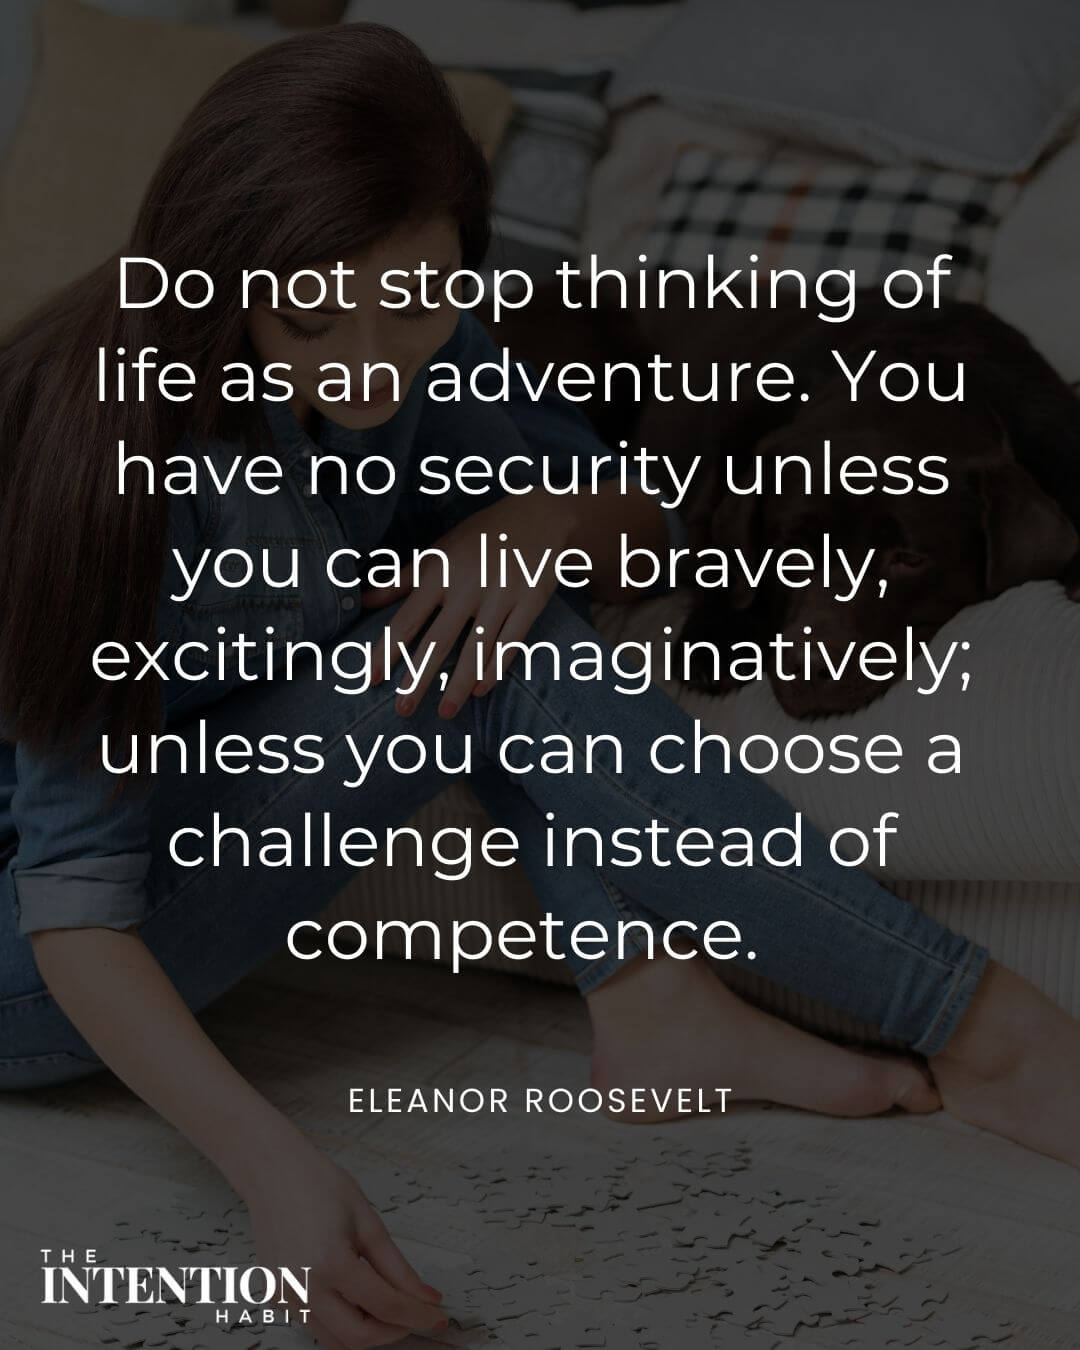 Intentional living quote - Do not stop thinking of life as an adventure you have no security unless you can live bravely, excitingly, imaginatively, unless you can choose a challenge instead of competence.